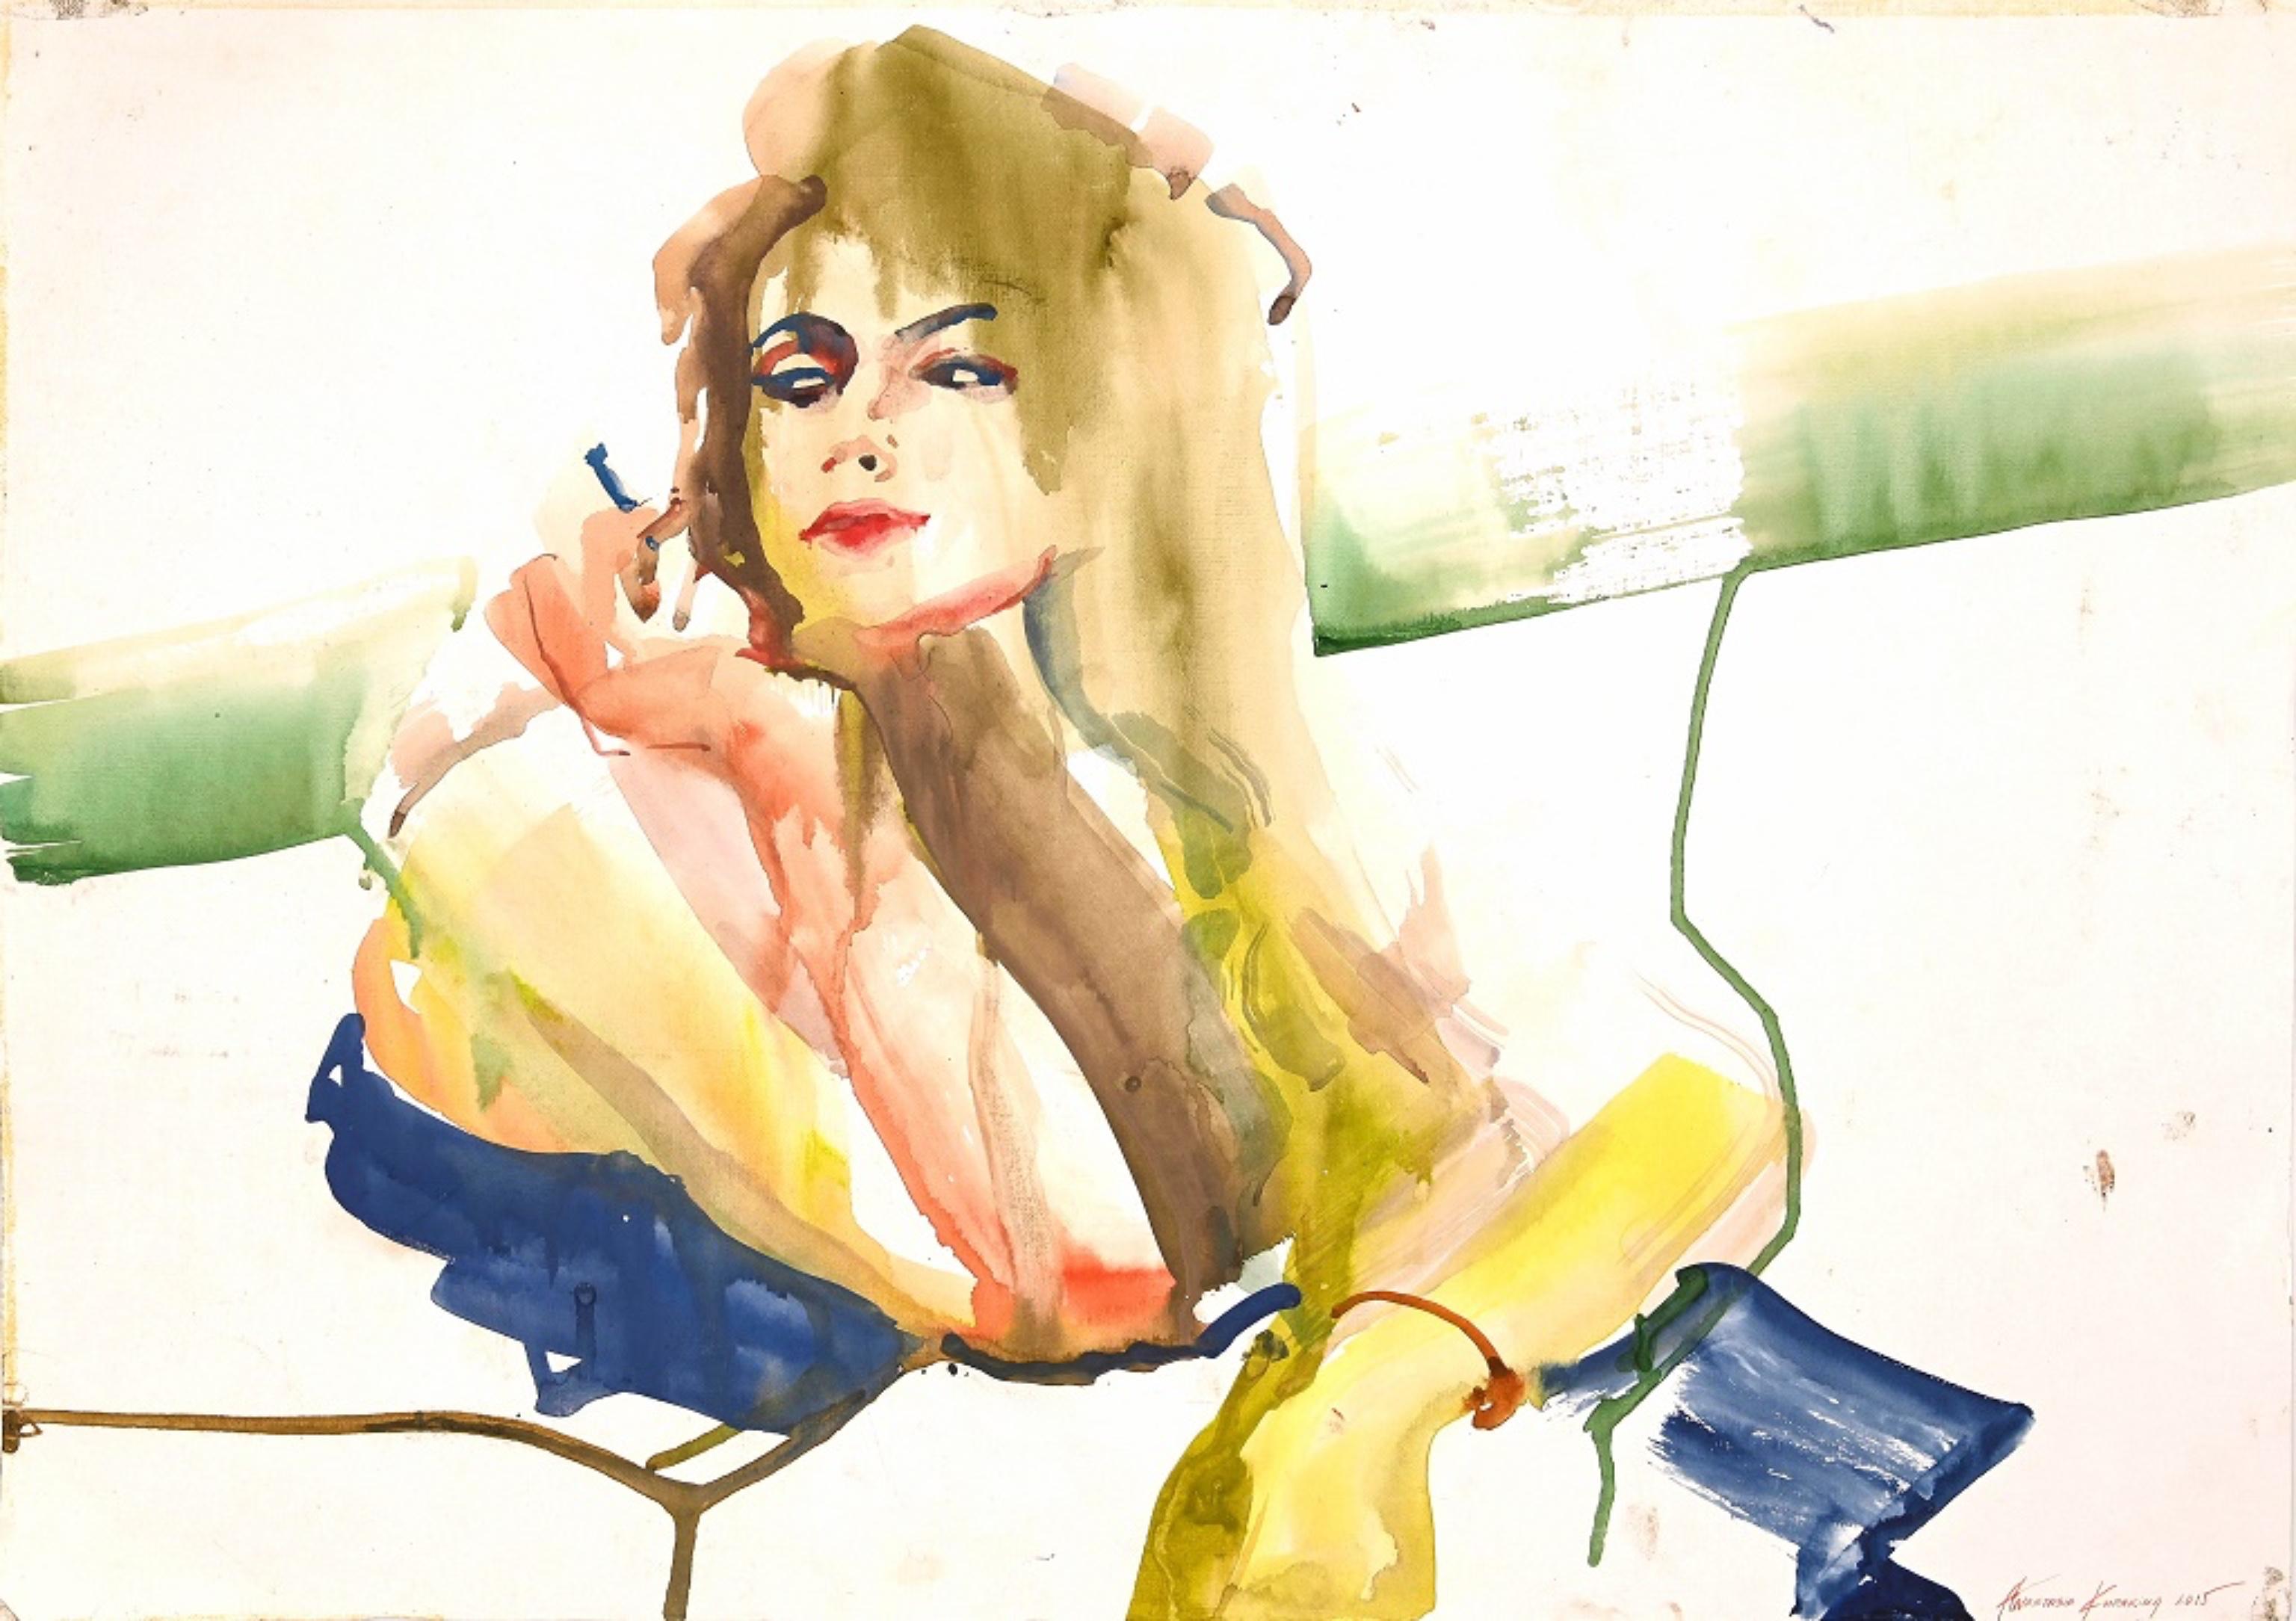 Portrait 2015 is an original and beautiful watercolour realized by Anastasia Kurakina in 2015.

The picture is in good conditions, on a white paper, with some spots on the margins.

Hand-signed by the artist on the lower right corner, and some notes